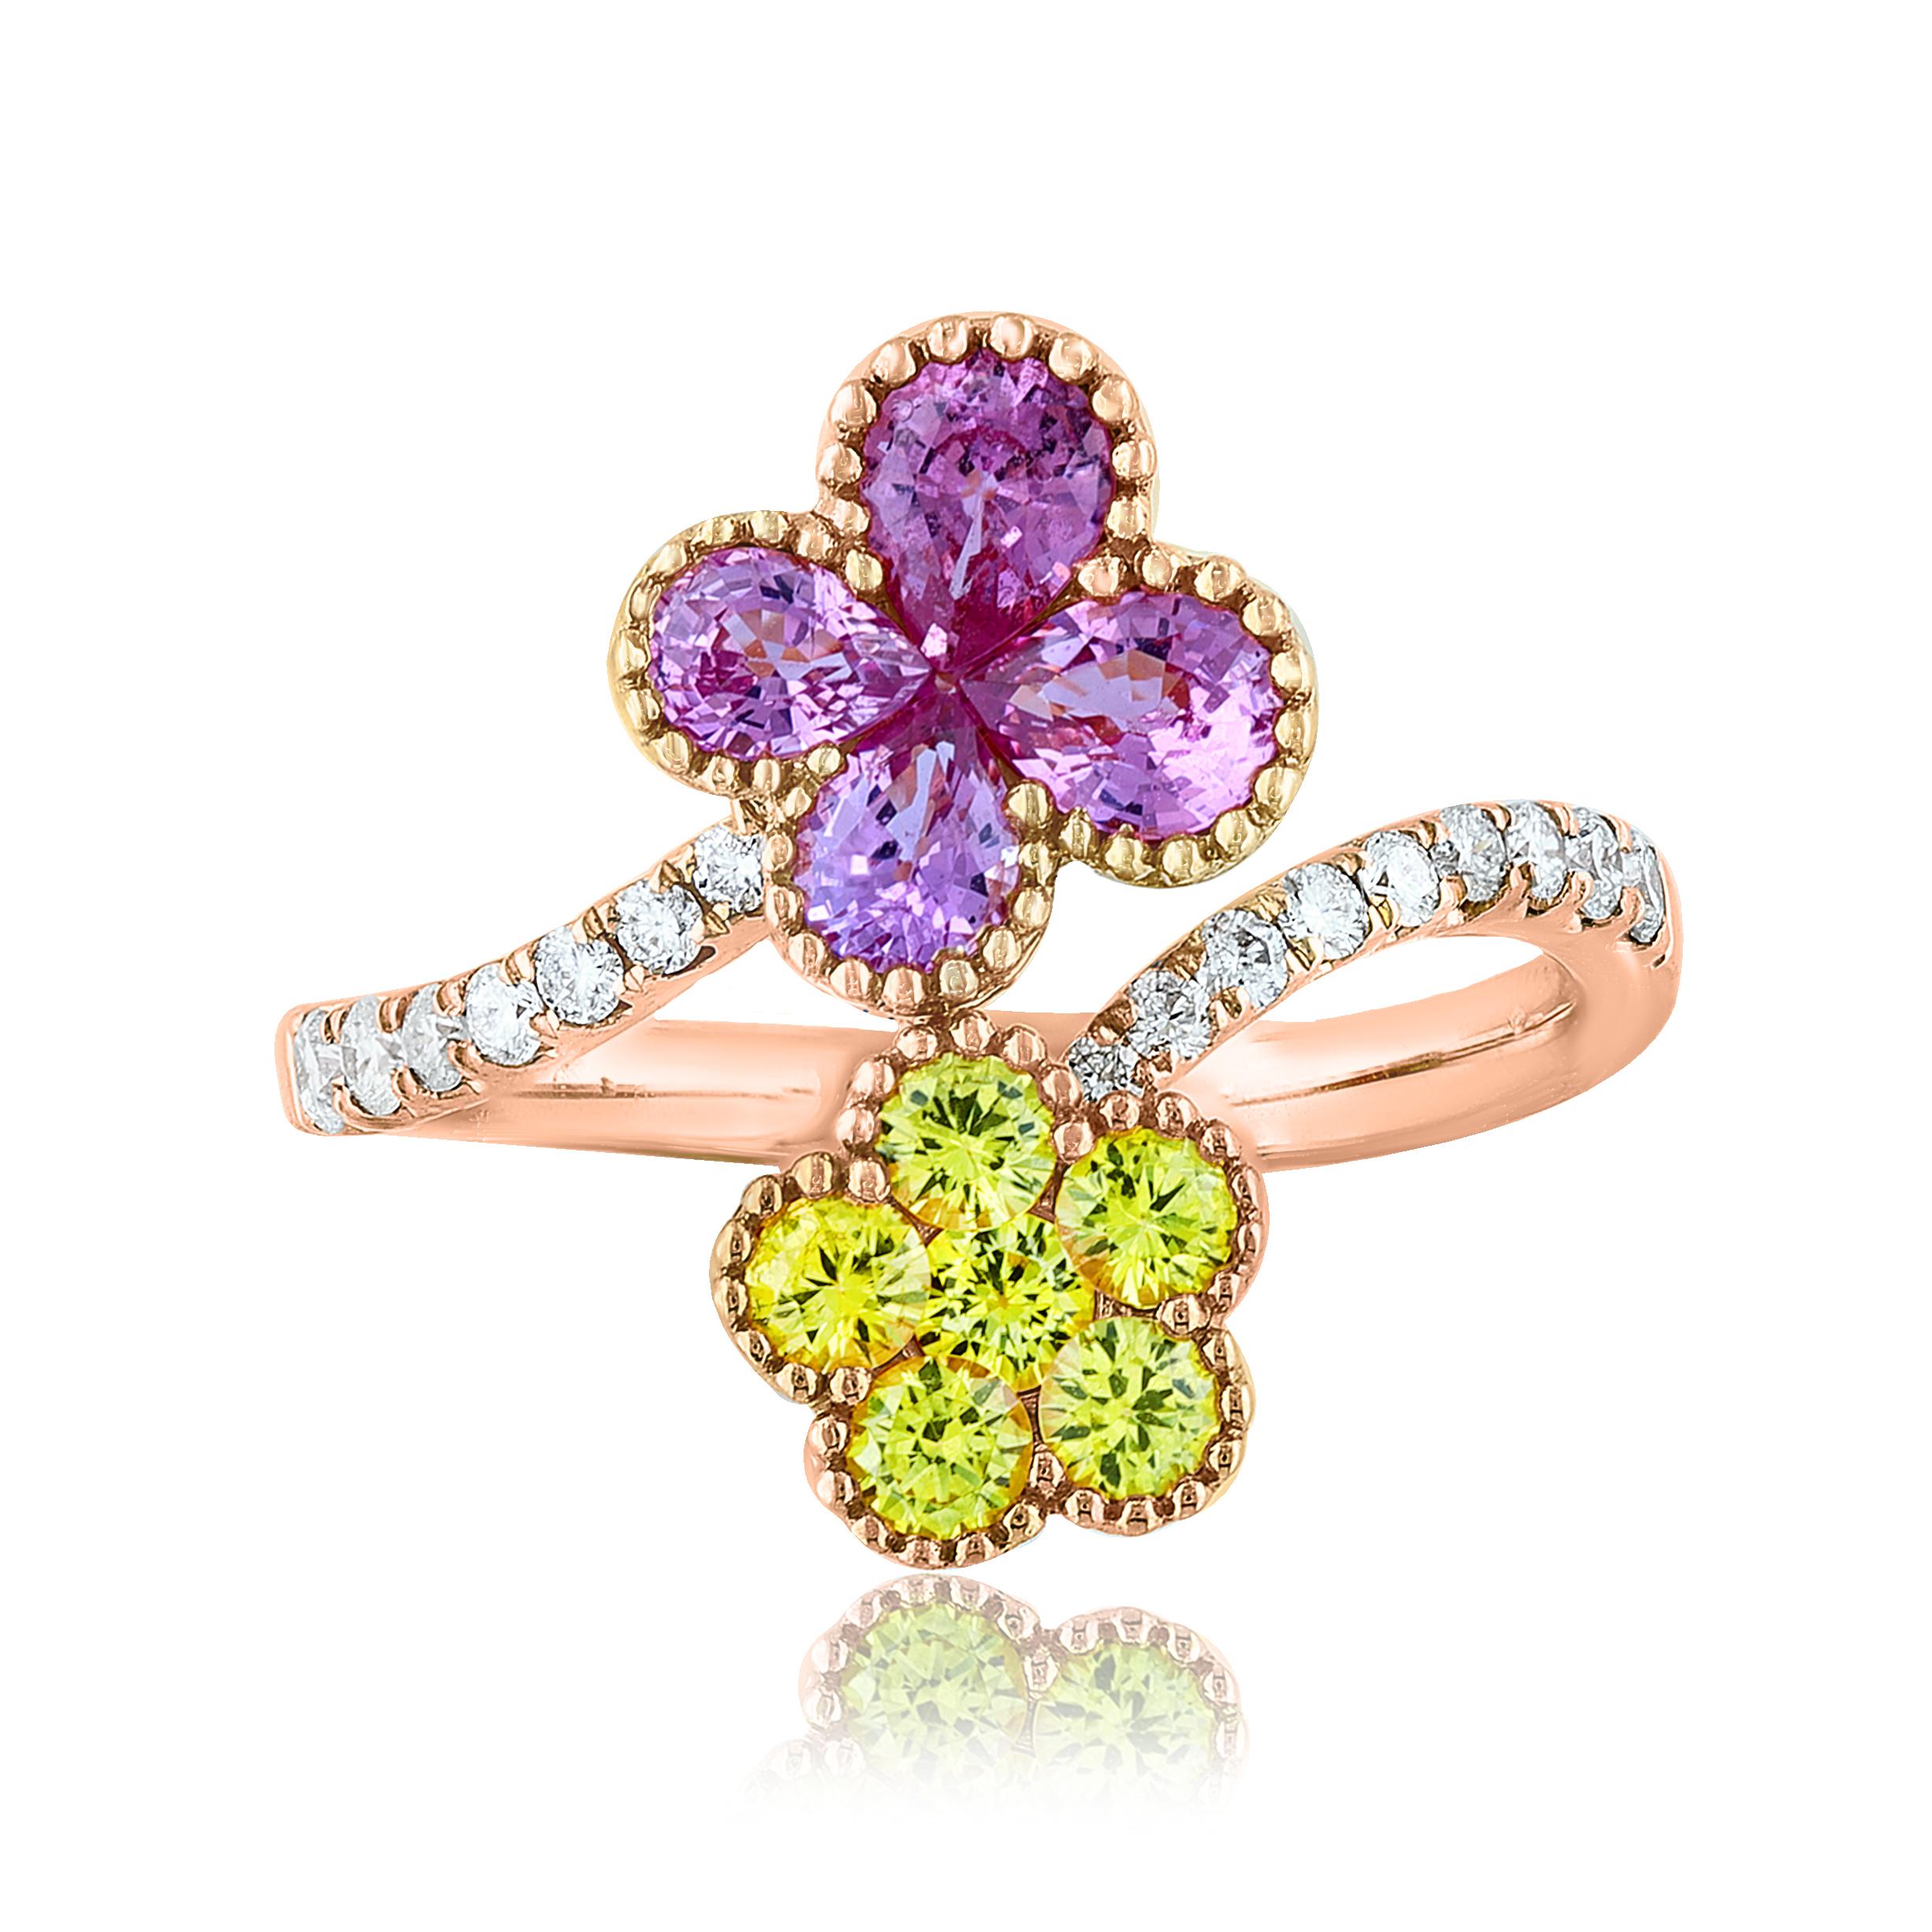 A fashionable piece of jewelry a cocktail flower ring showcasing 0.83 carats of 4 pink sapphires and 0.45 carats of 6 yellow sapphires.  16 accent diamonds weigh 0.21 carats in total.

Size 6.5 US (Sizable). 
All diamonds are GH color SI1